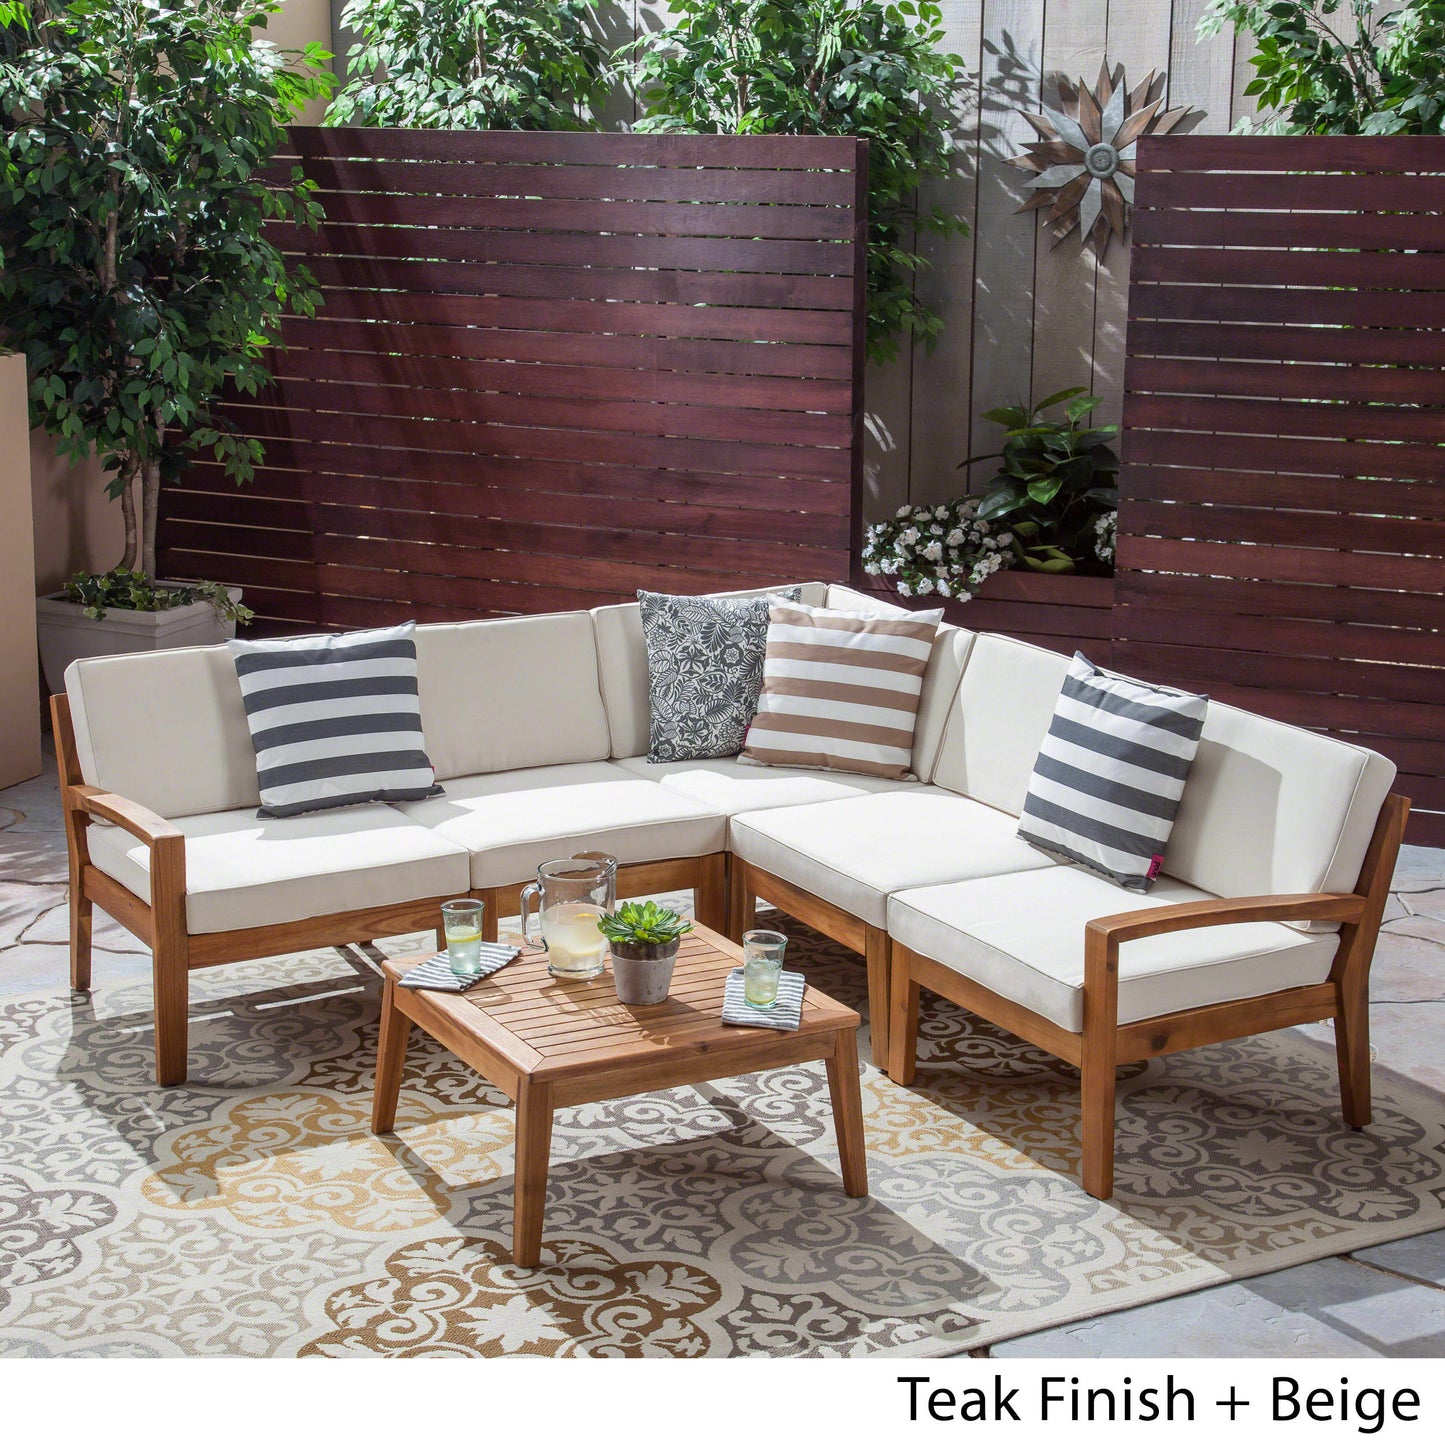 Roy Outdoor Acacia Wood 5 Seater Sectional Sofa Set with Coffee Table